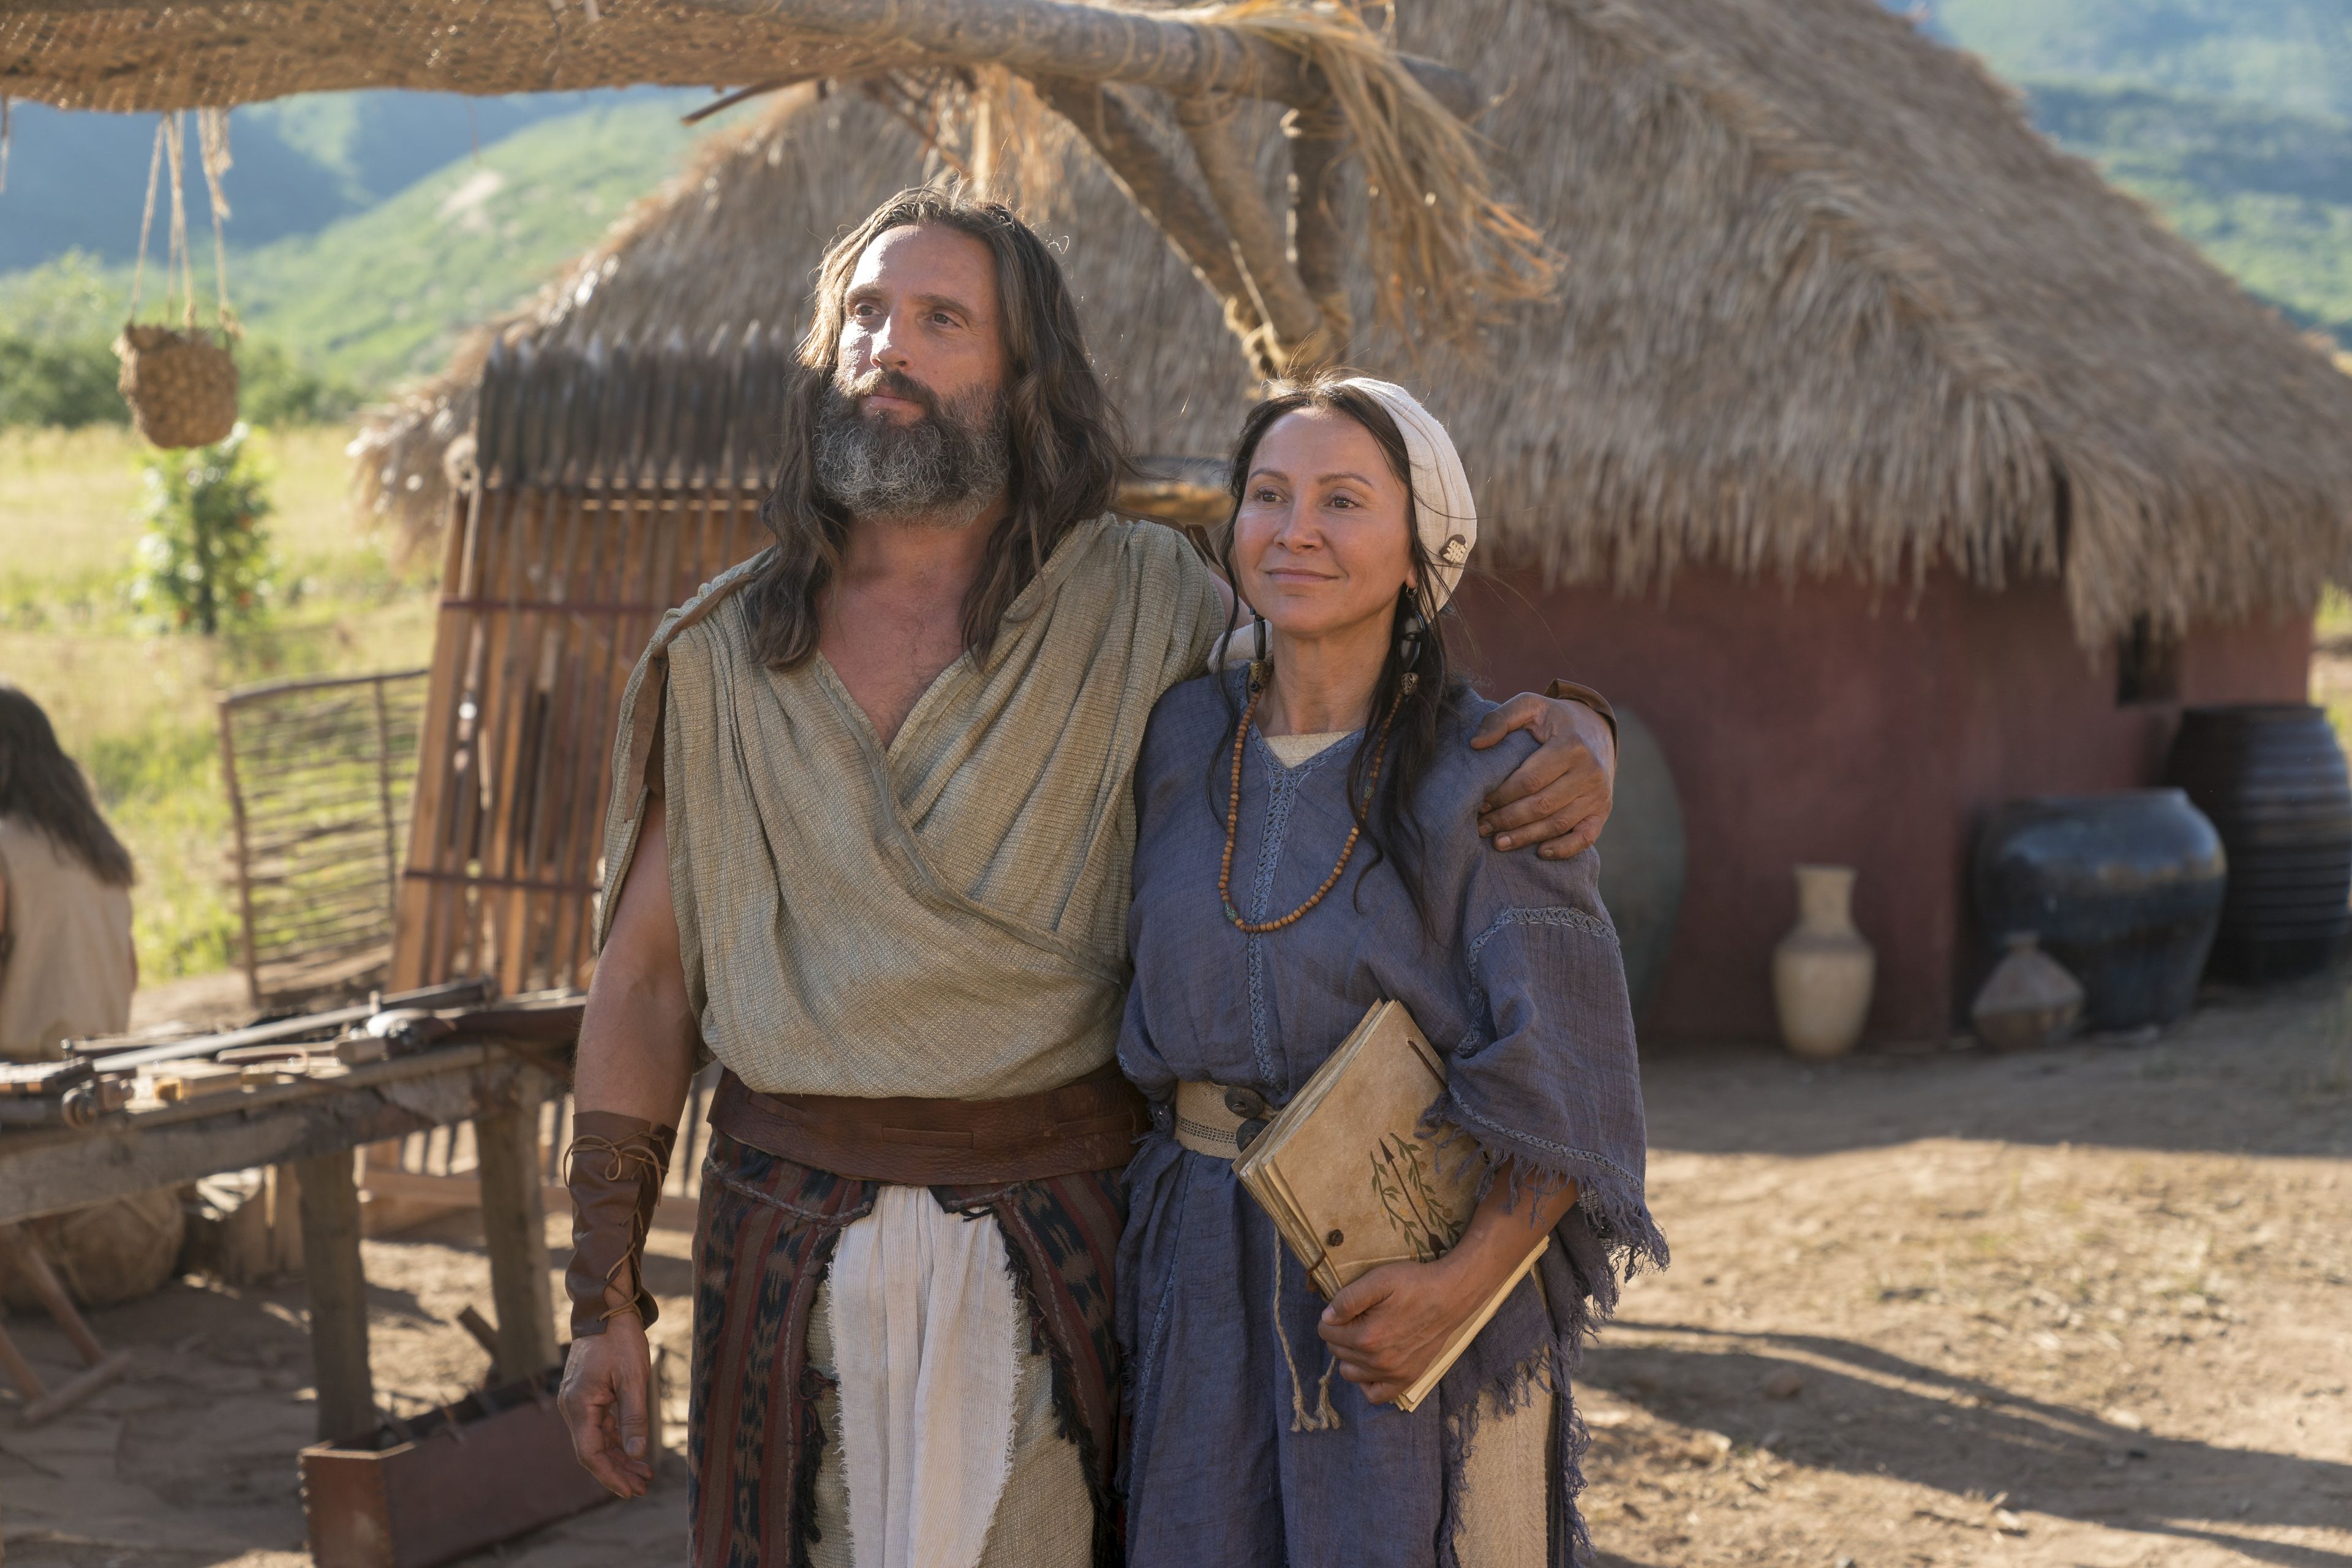 Nephi with his arm around his wife.